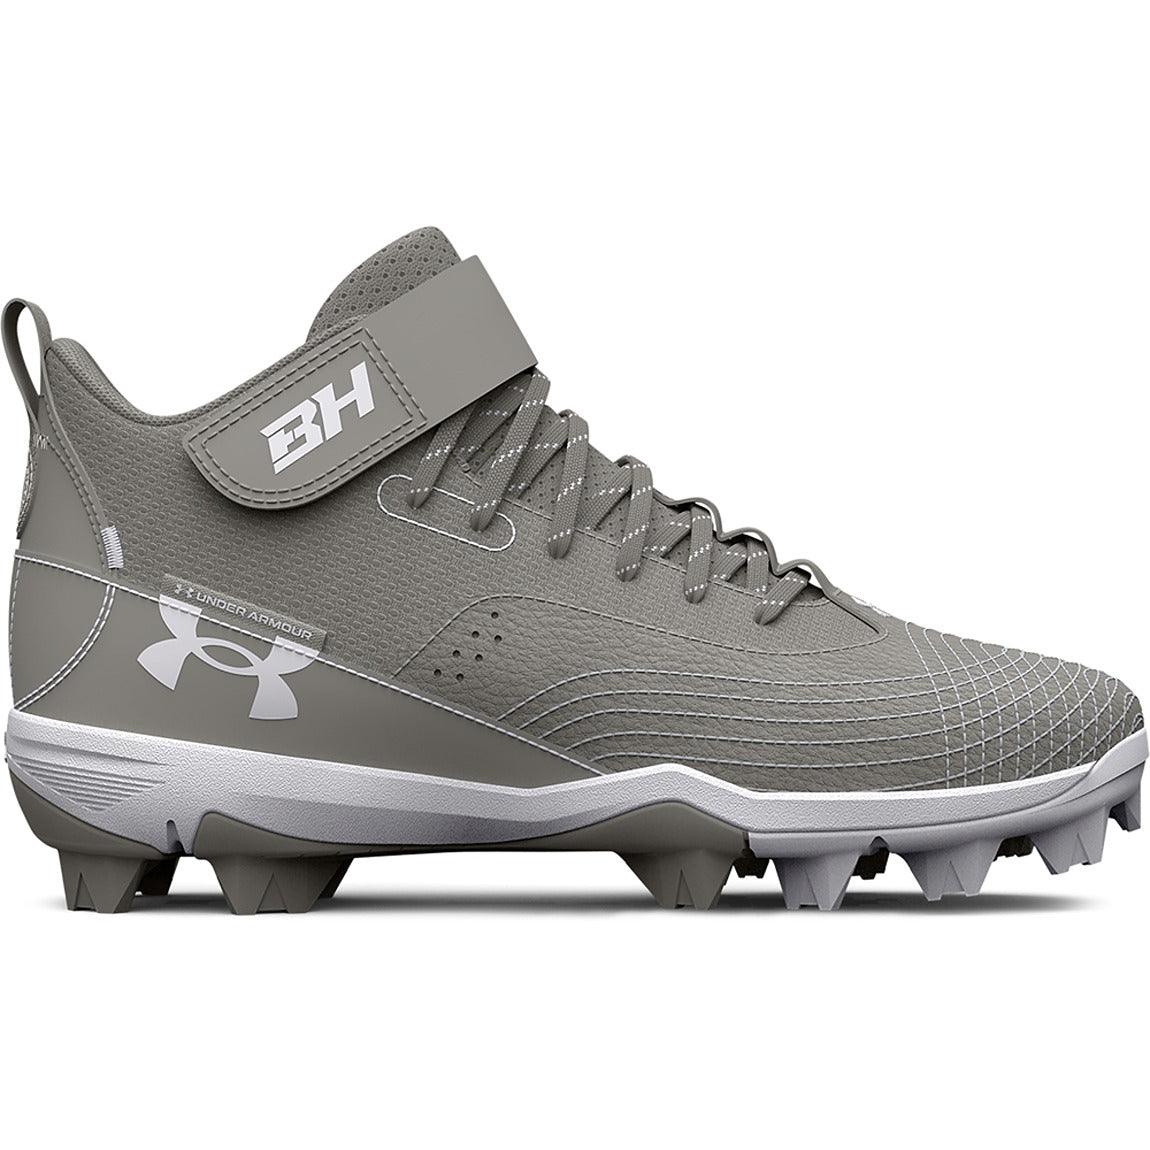 Under Armour Harper 7 Mid RM Jr. Baseball Cleats – Sports Excellence